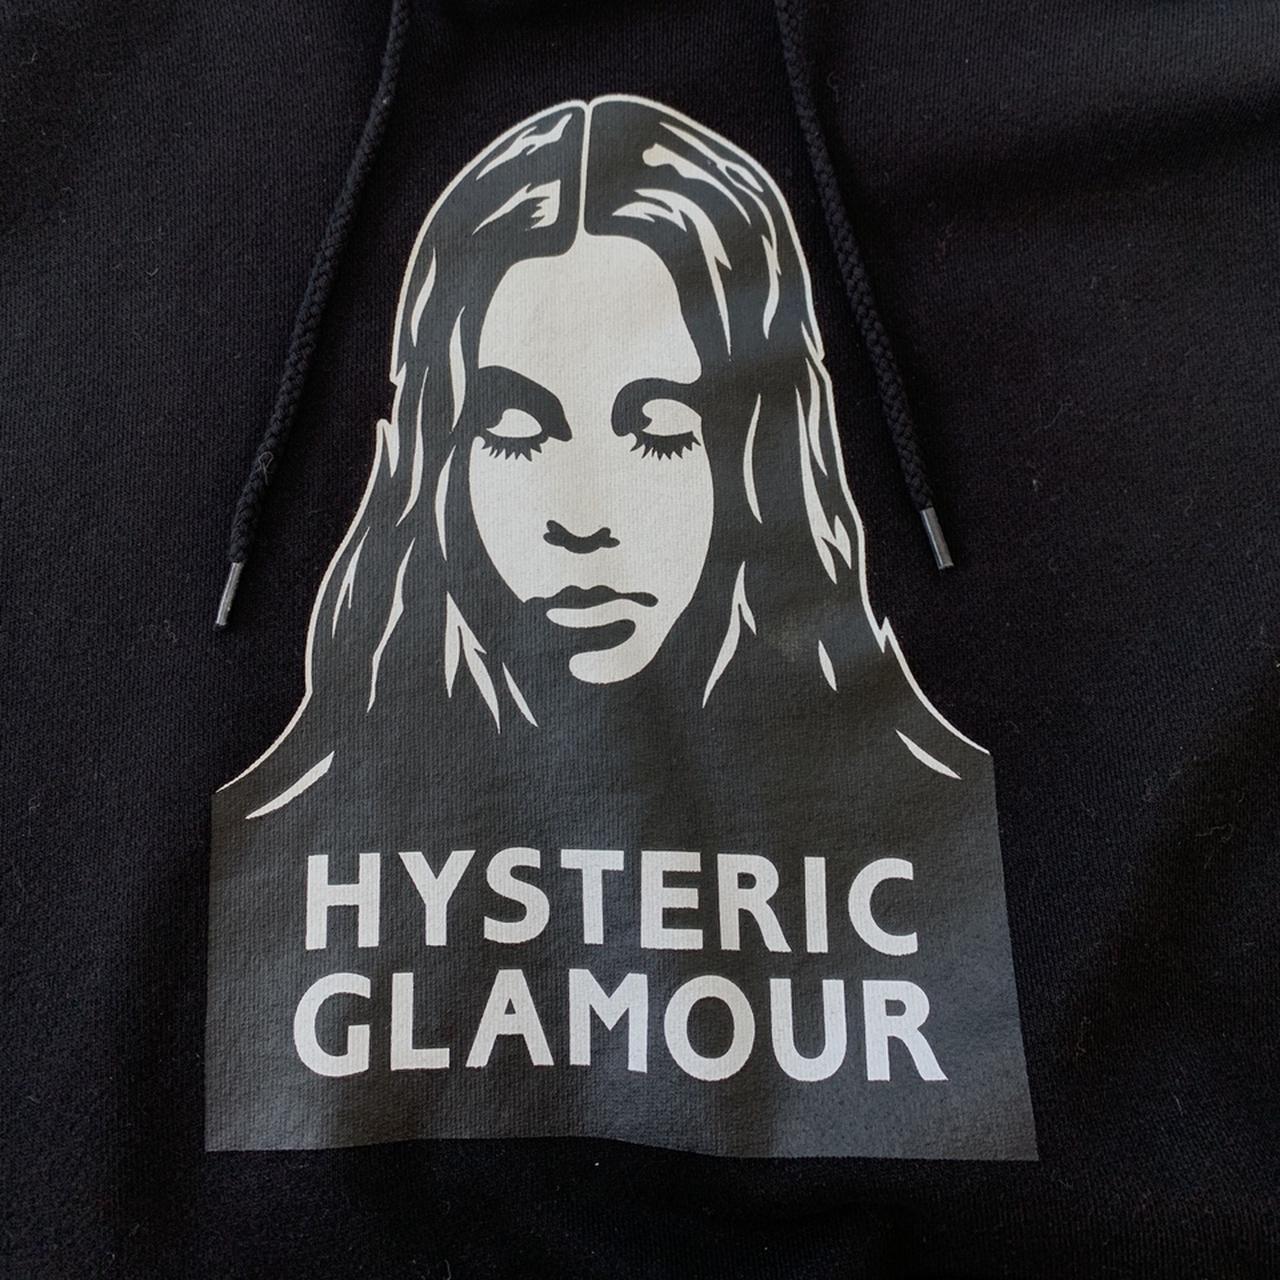 Hysteric Glamour X-Girl Hoodie, Size: M, Worn Only